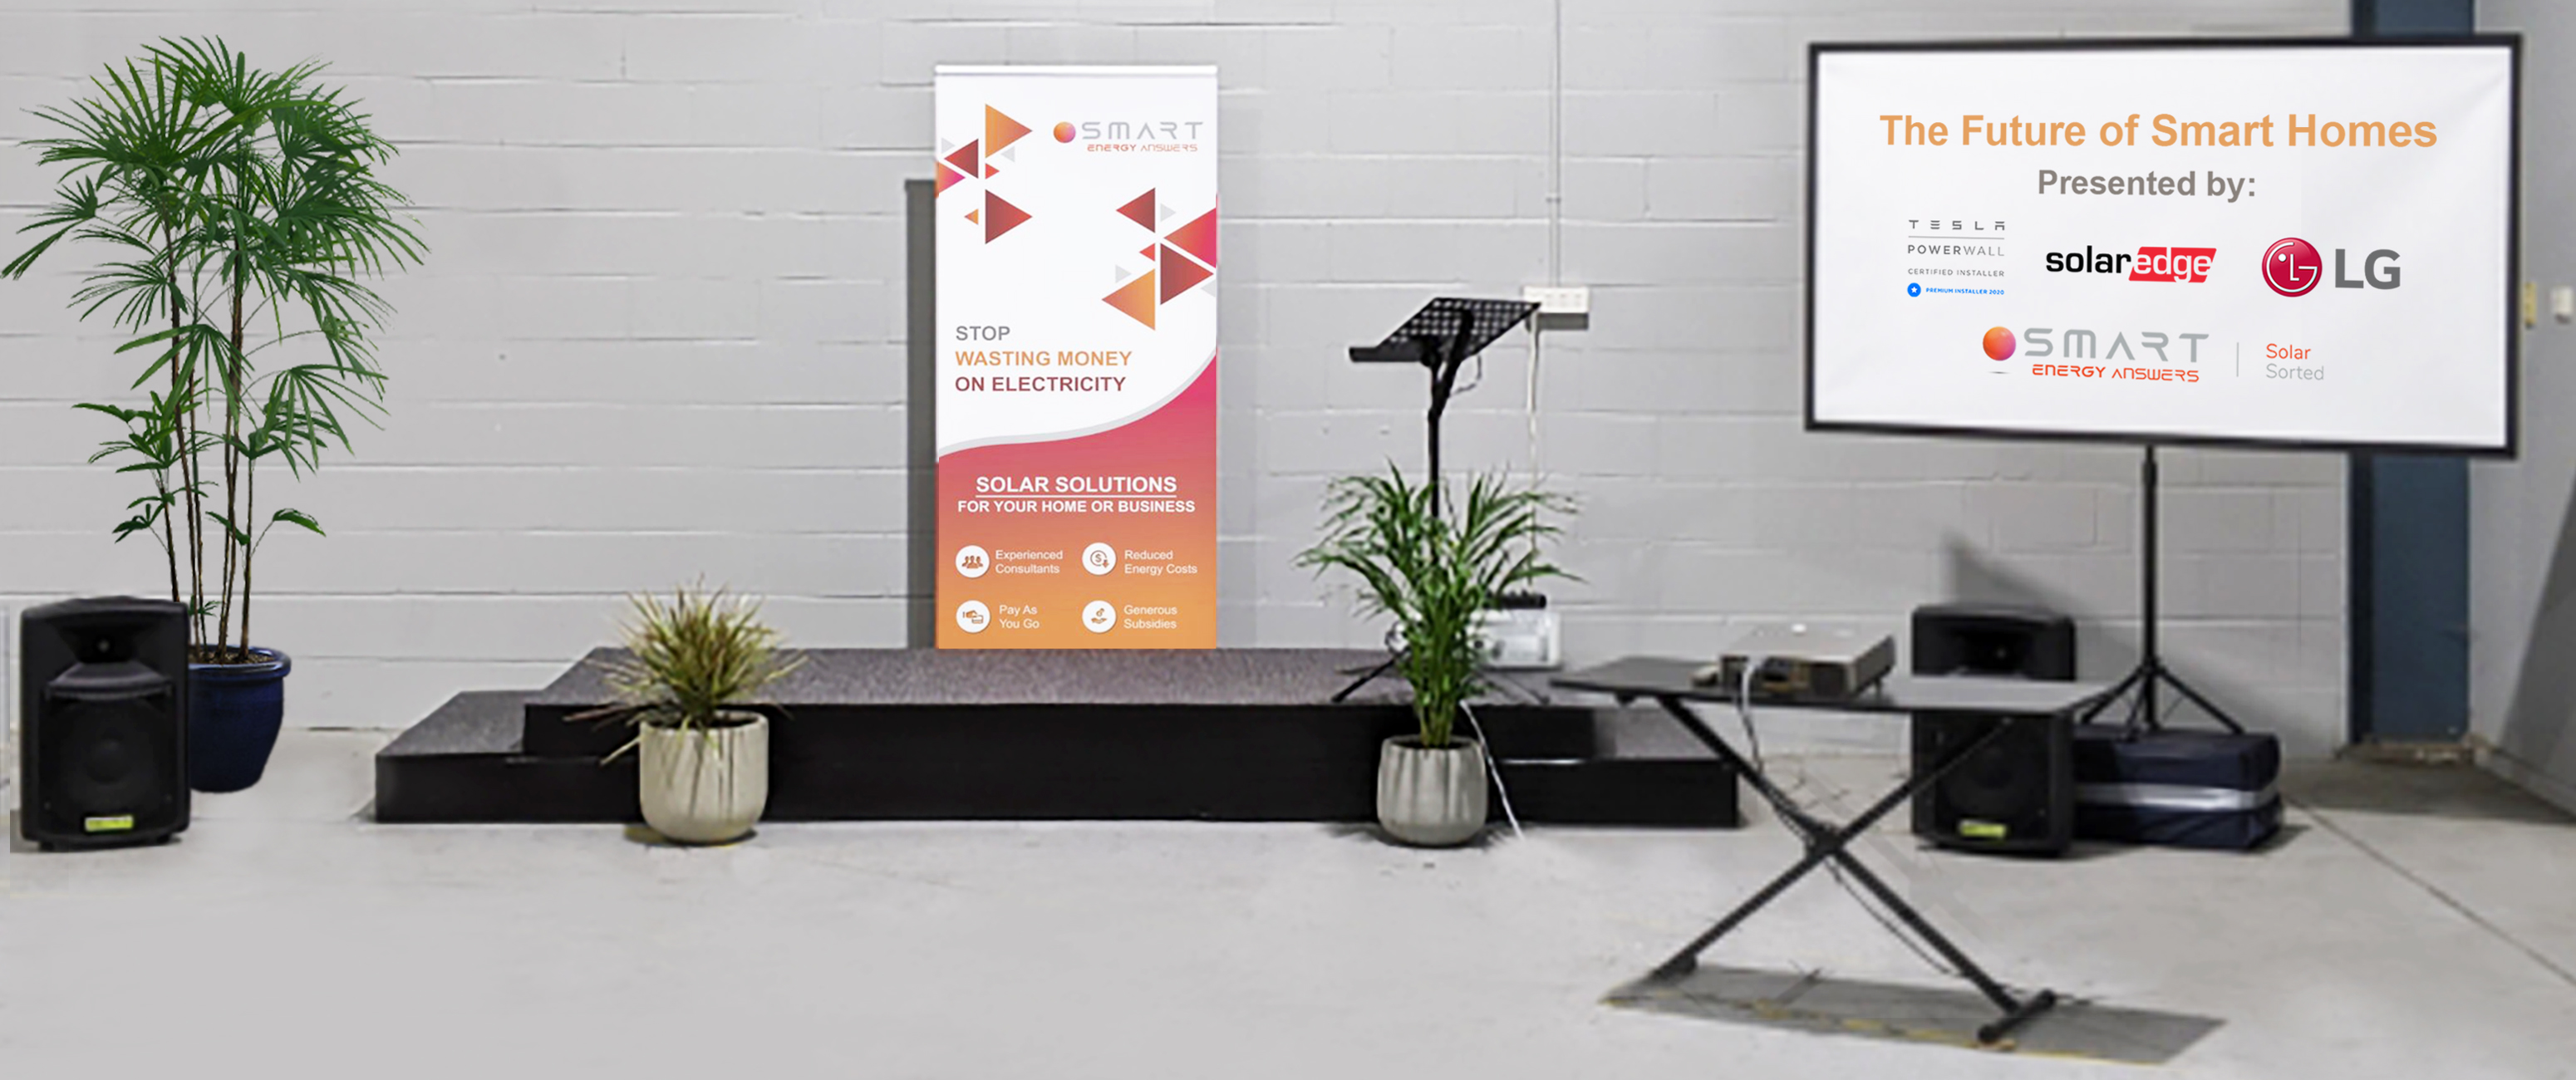 The Future of The Smart Homes Event - featured image